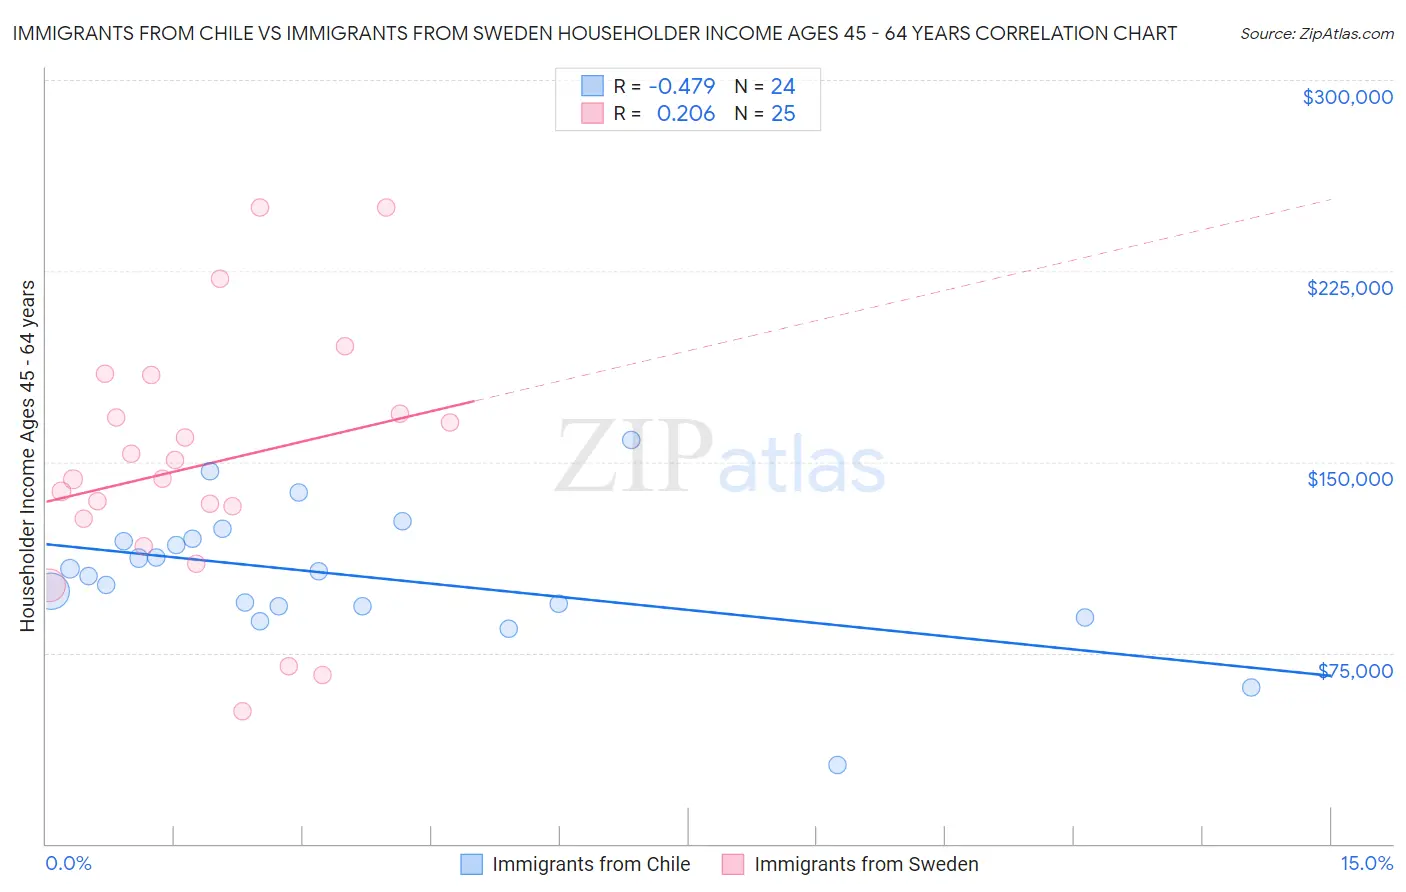 Immigrants from Chile vs Immigrants from Sweden Householder Income Ages 45 - 64 years